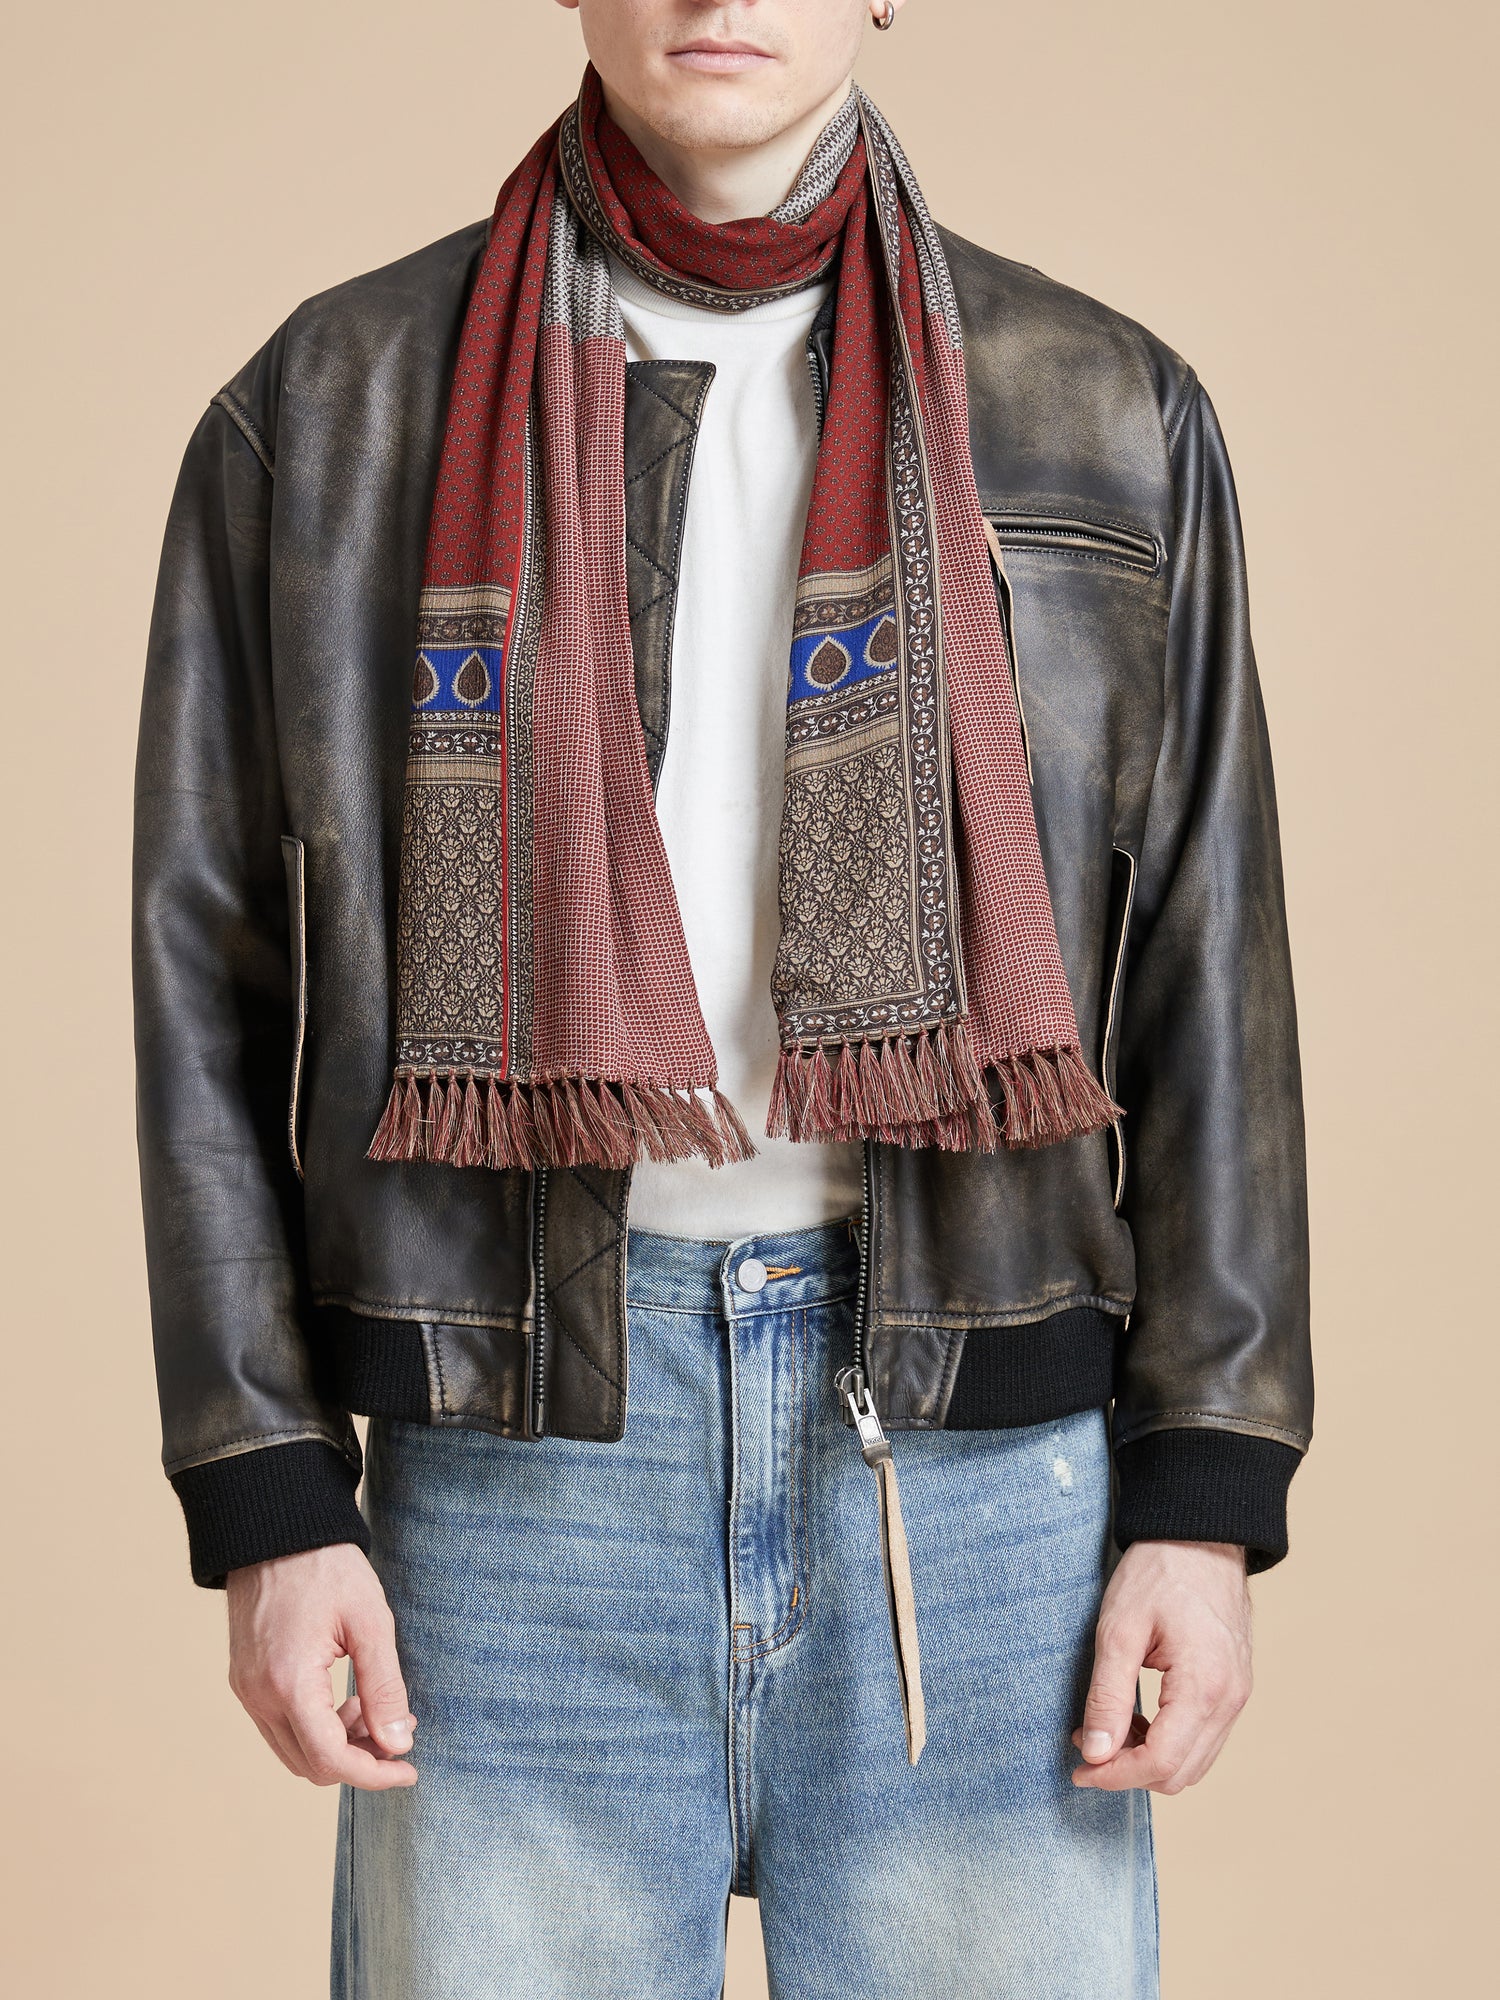 A man in a leather jacket is wearing the Found Paisley Medley Scarf.